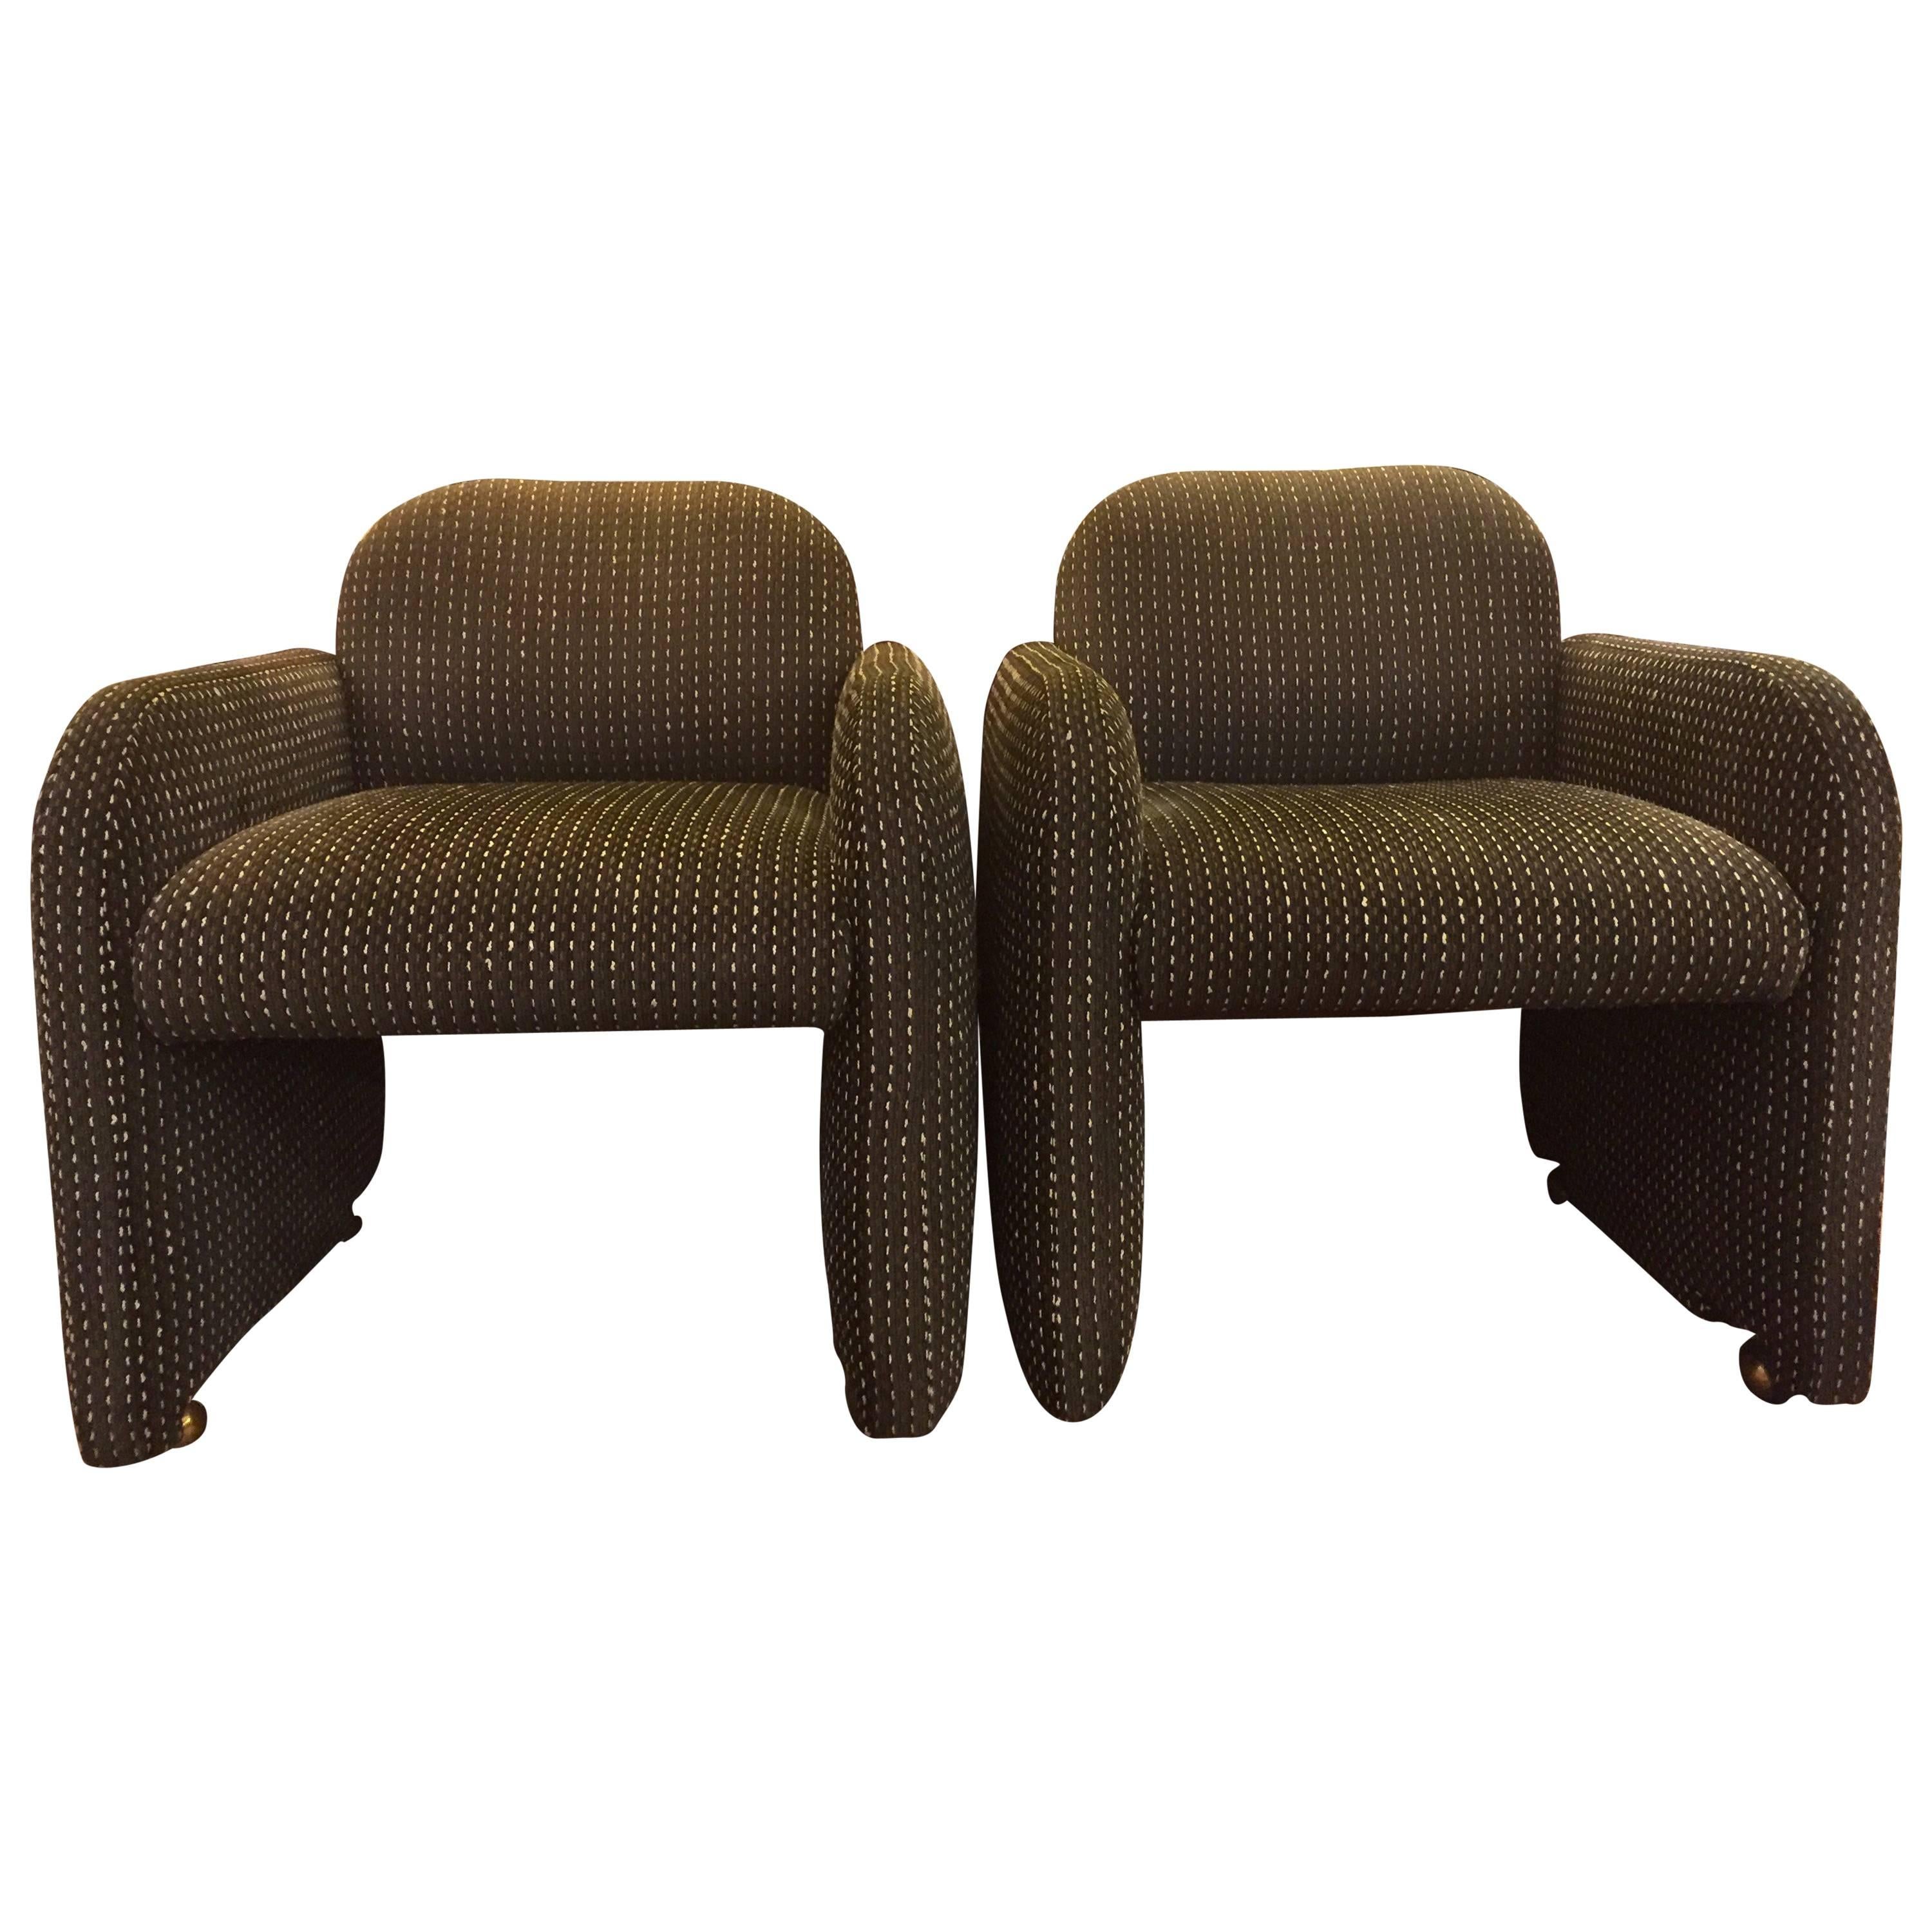 Pair of Cool Box Shaped Upholstered Mid-Century Modern Club Chairs